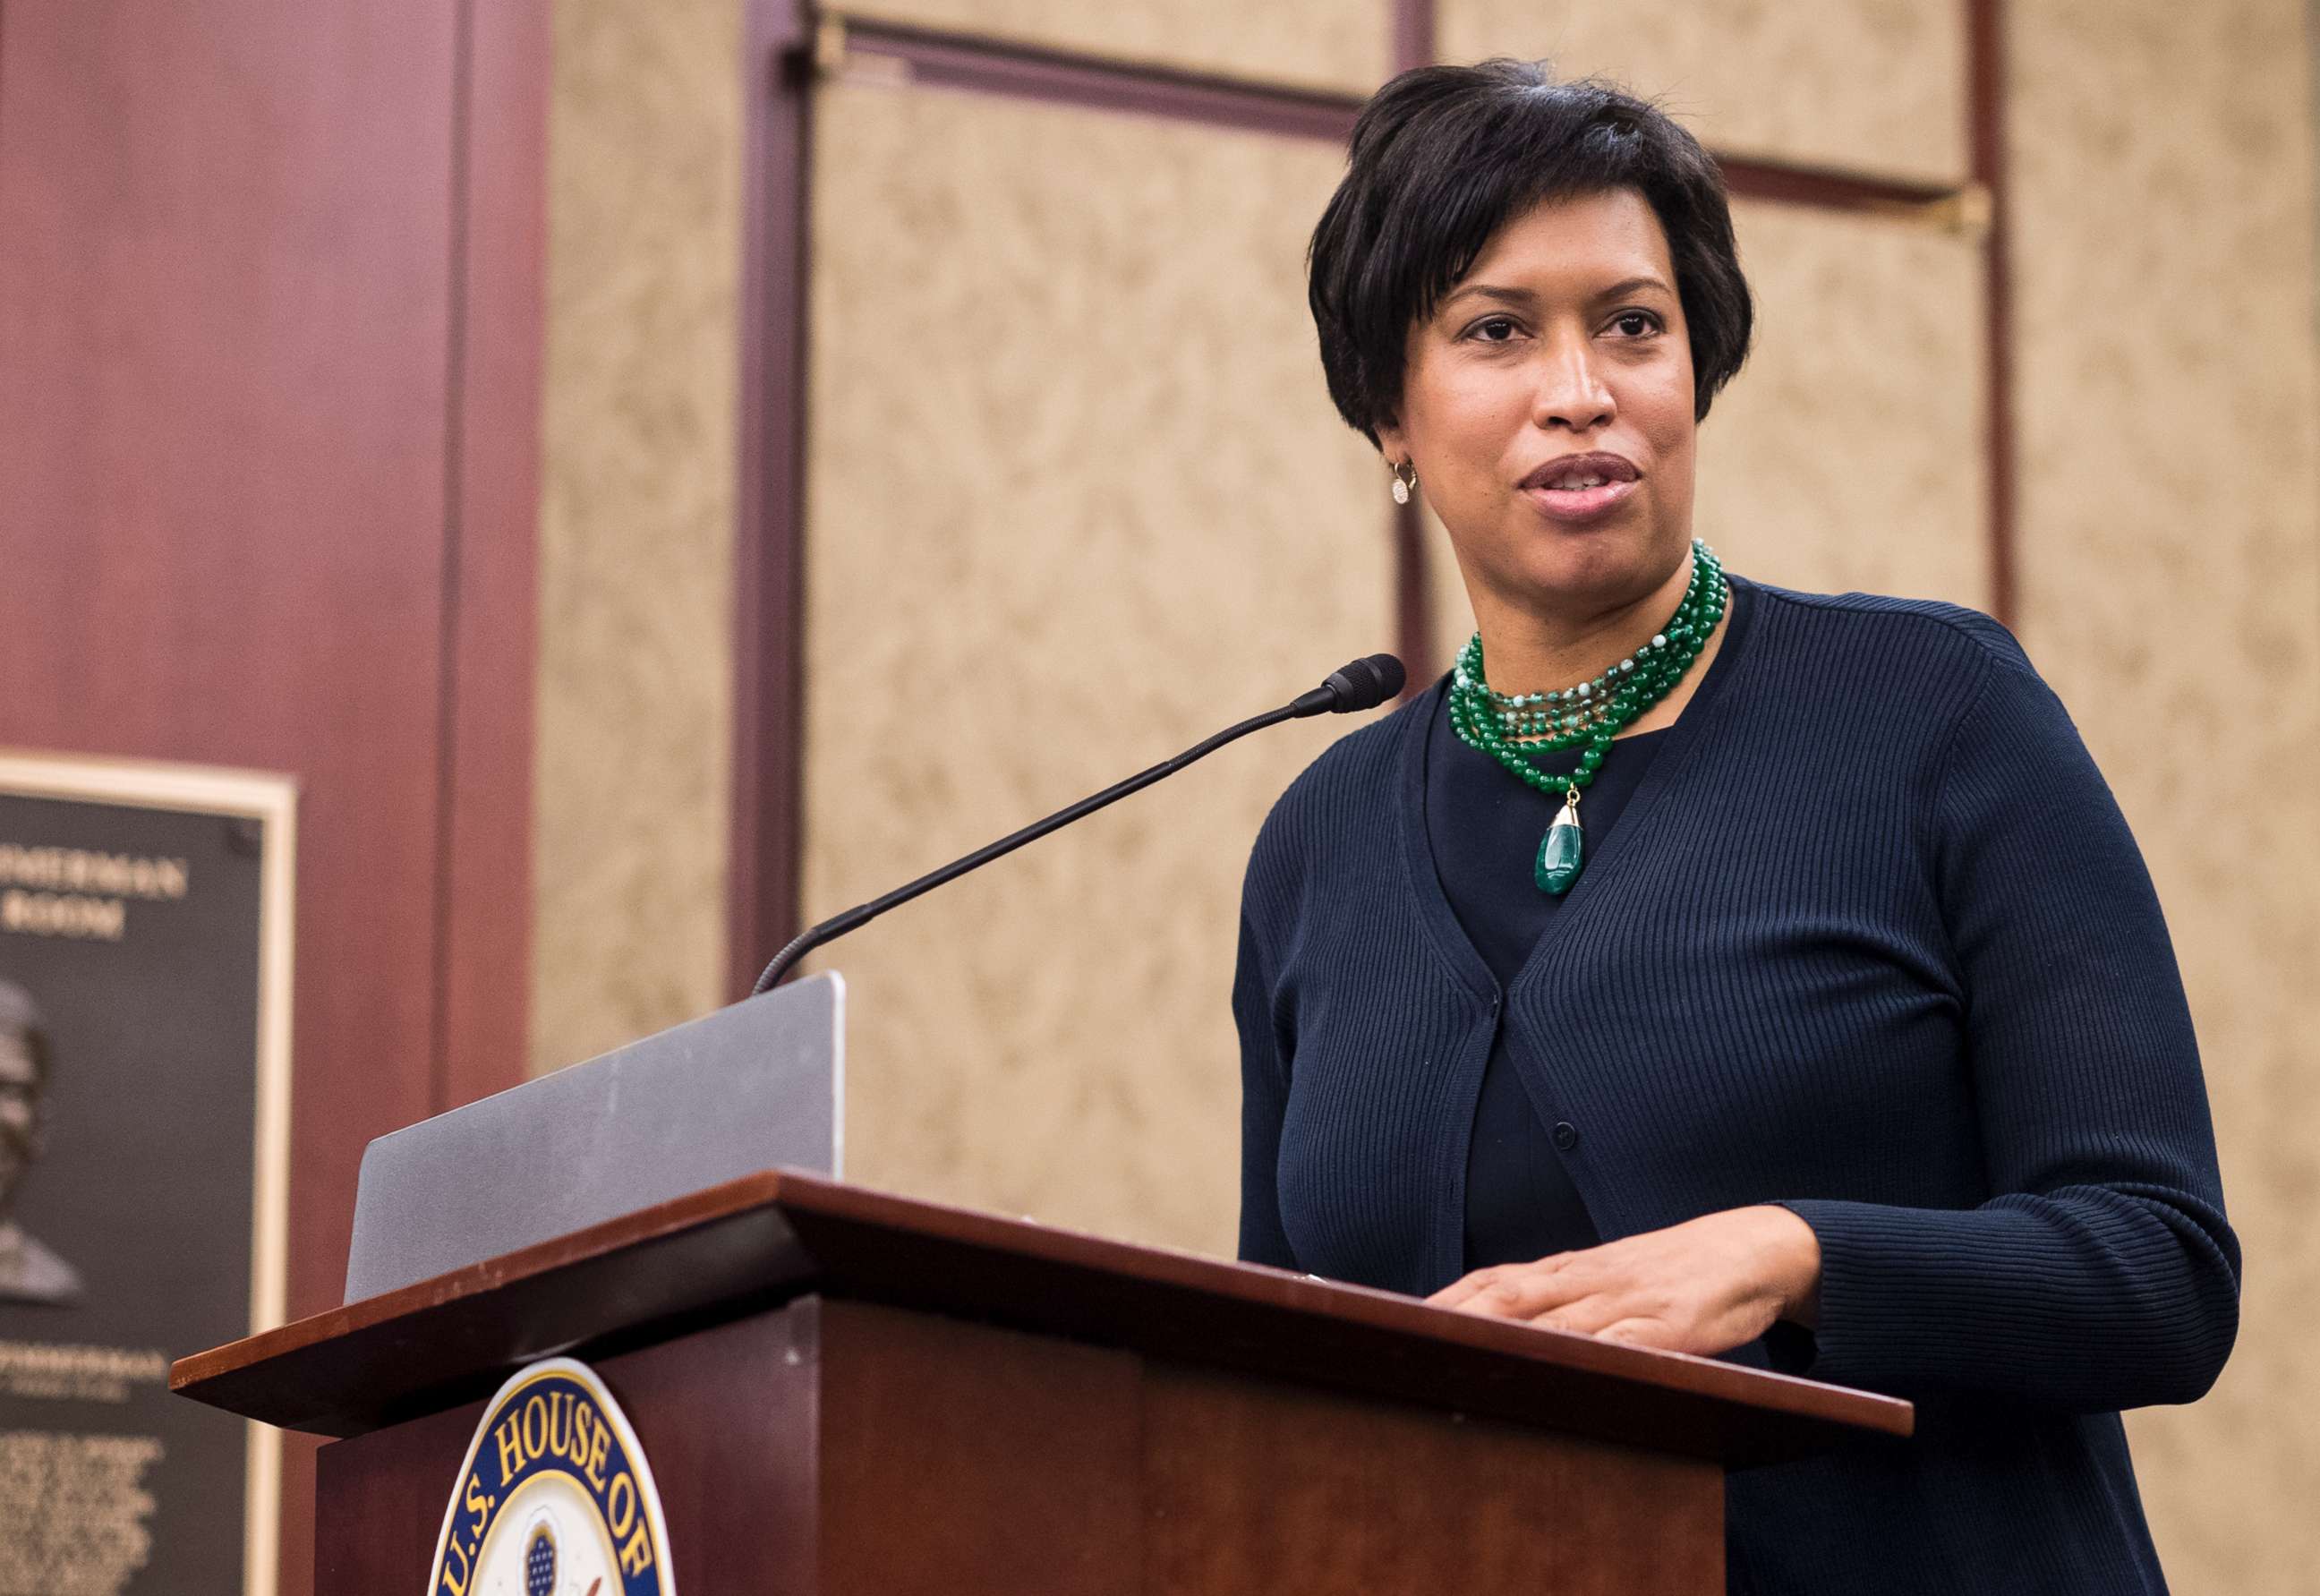 PHOTO: Mayor Muriel Bowser speaks during a news conference in the Capitol to discuss efforts to protect D.C.'s local laws during the FY2019 appropriations process in this May 2, 2018 file photo.